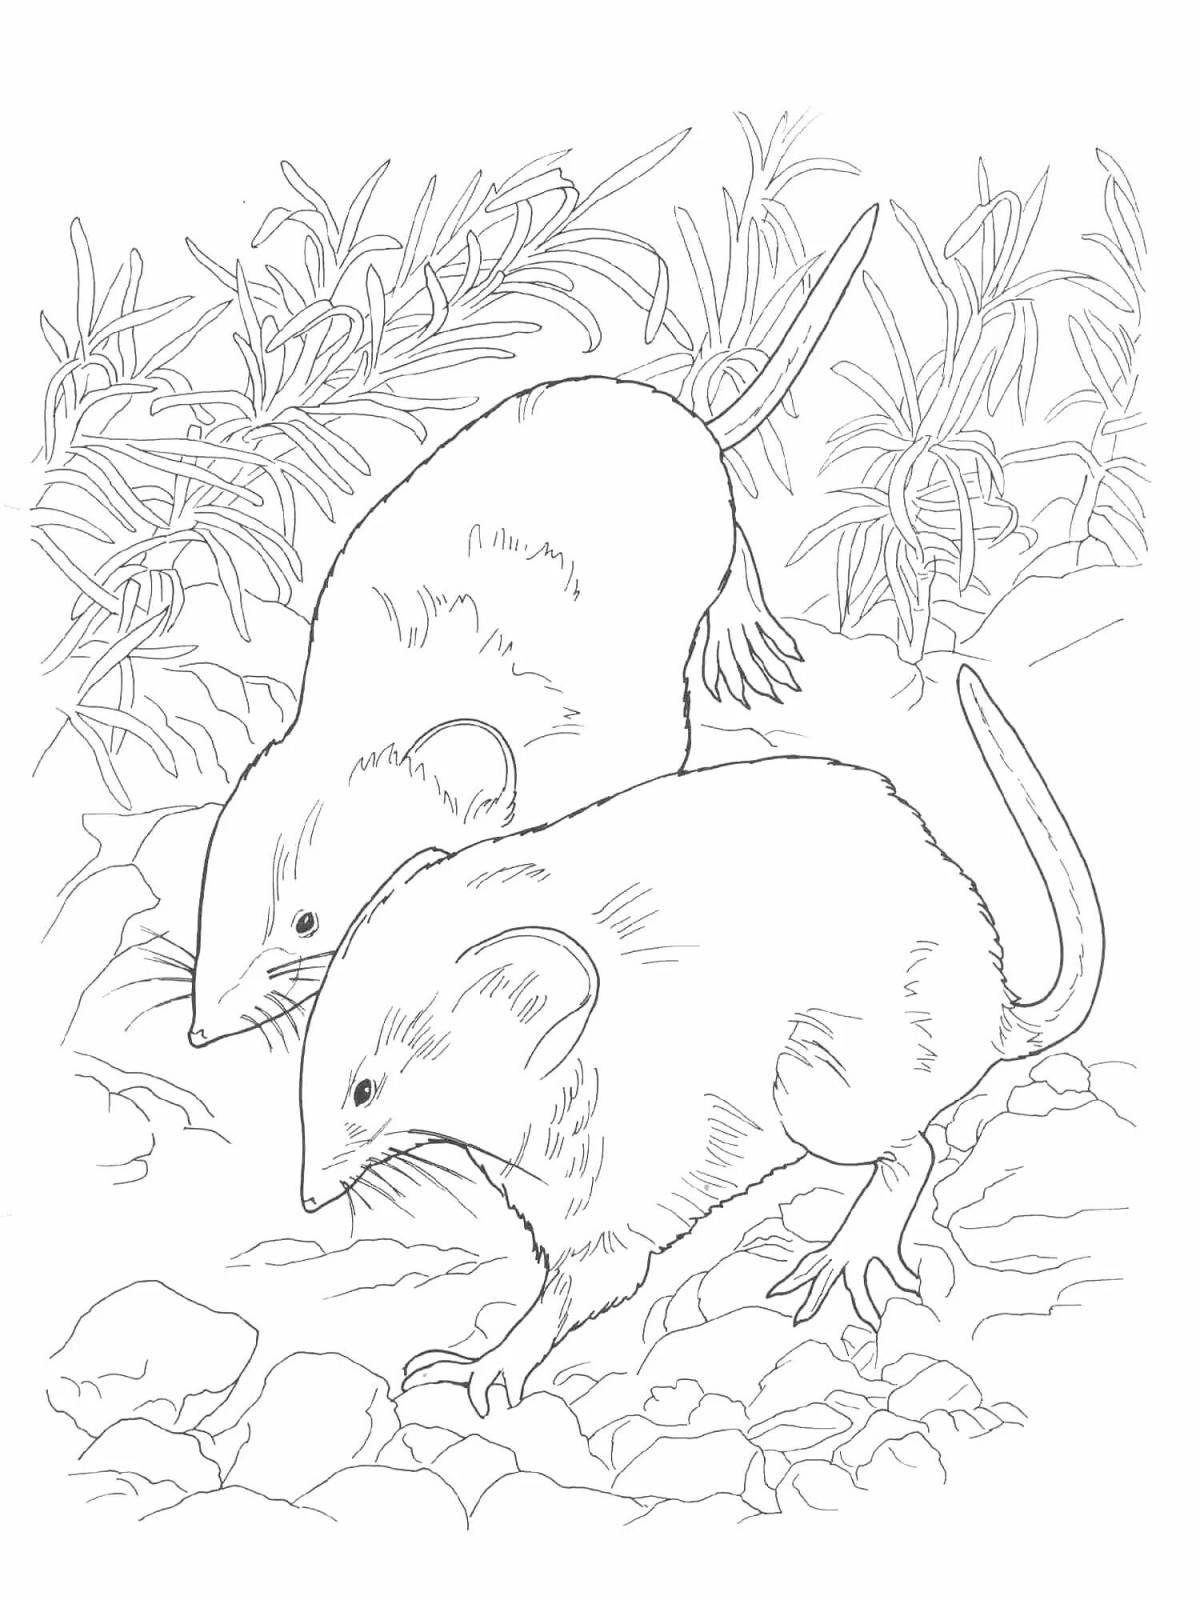 Humorous coloring mouse-vole